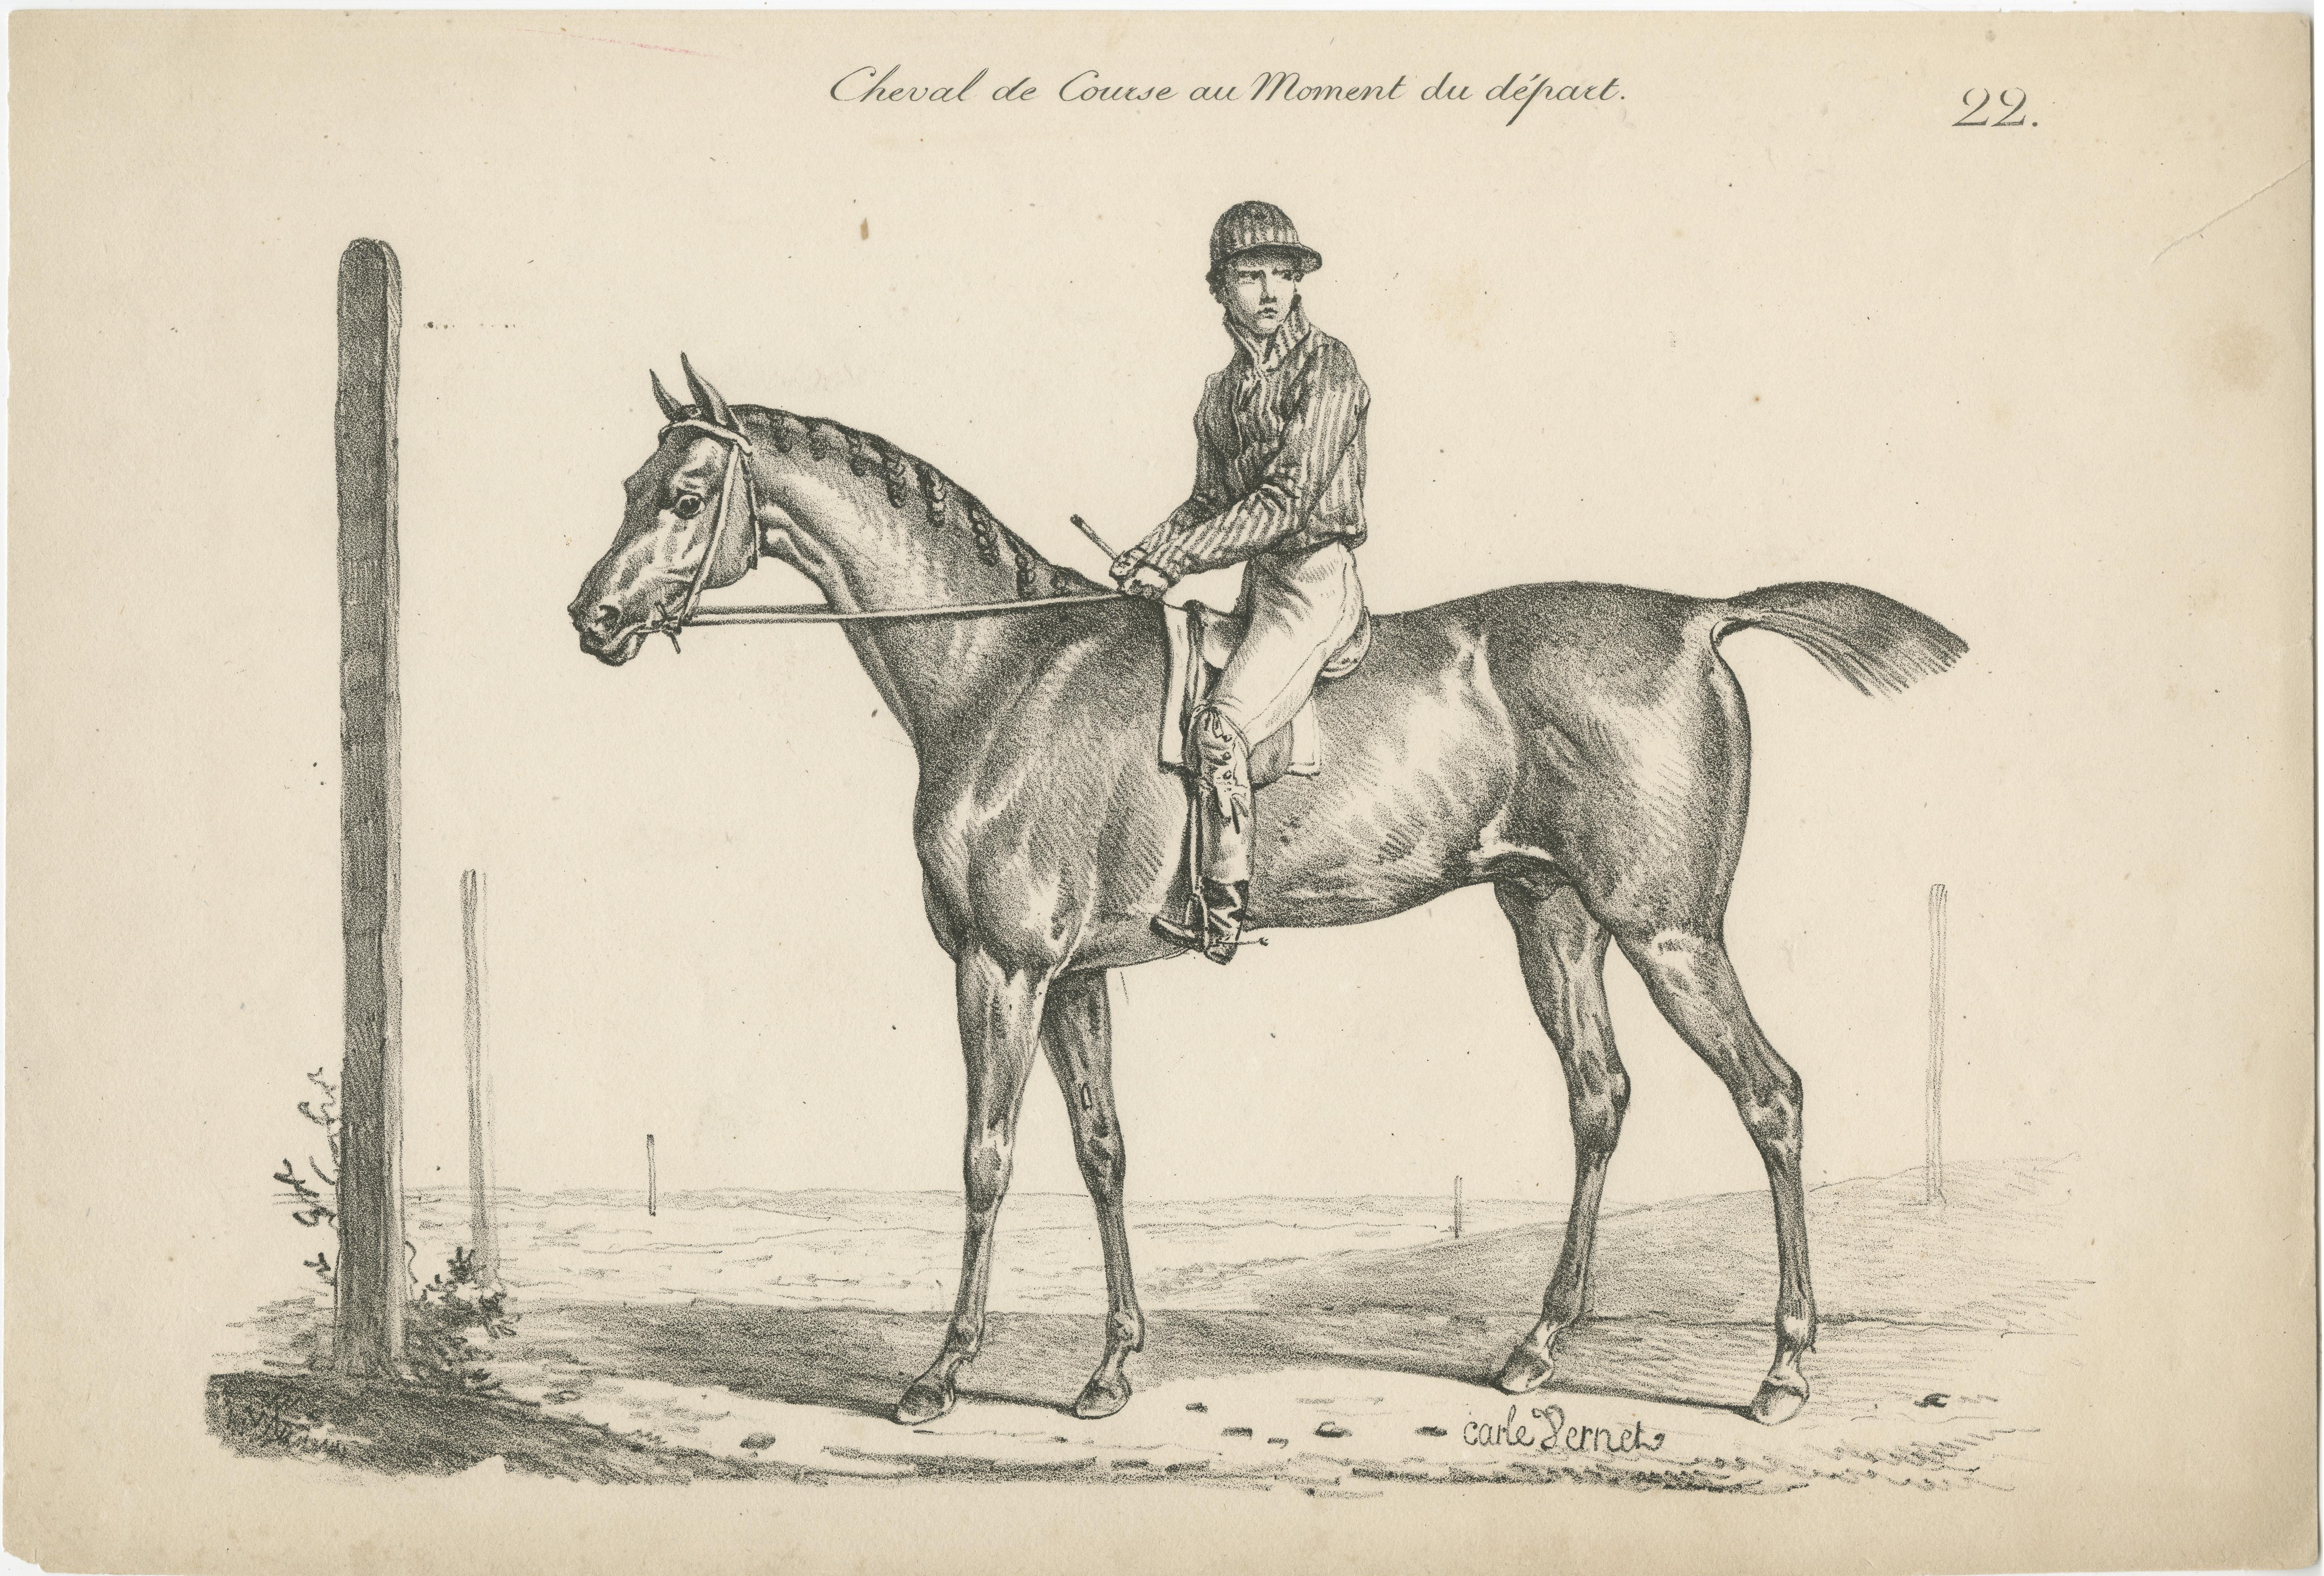 Antique print titled 'Cheval de Course au Moment du départ'. Original old print of a race horse and jockey at the start. Made after a painting by Carle Vernet. Published circa 1890.